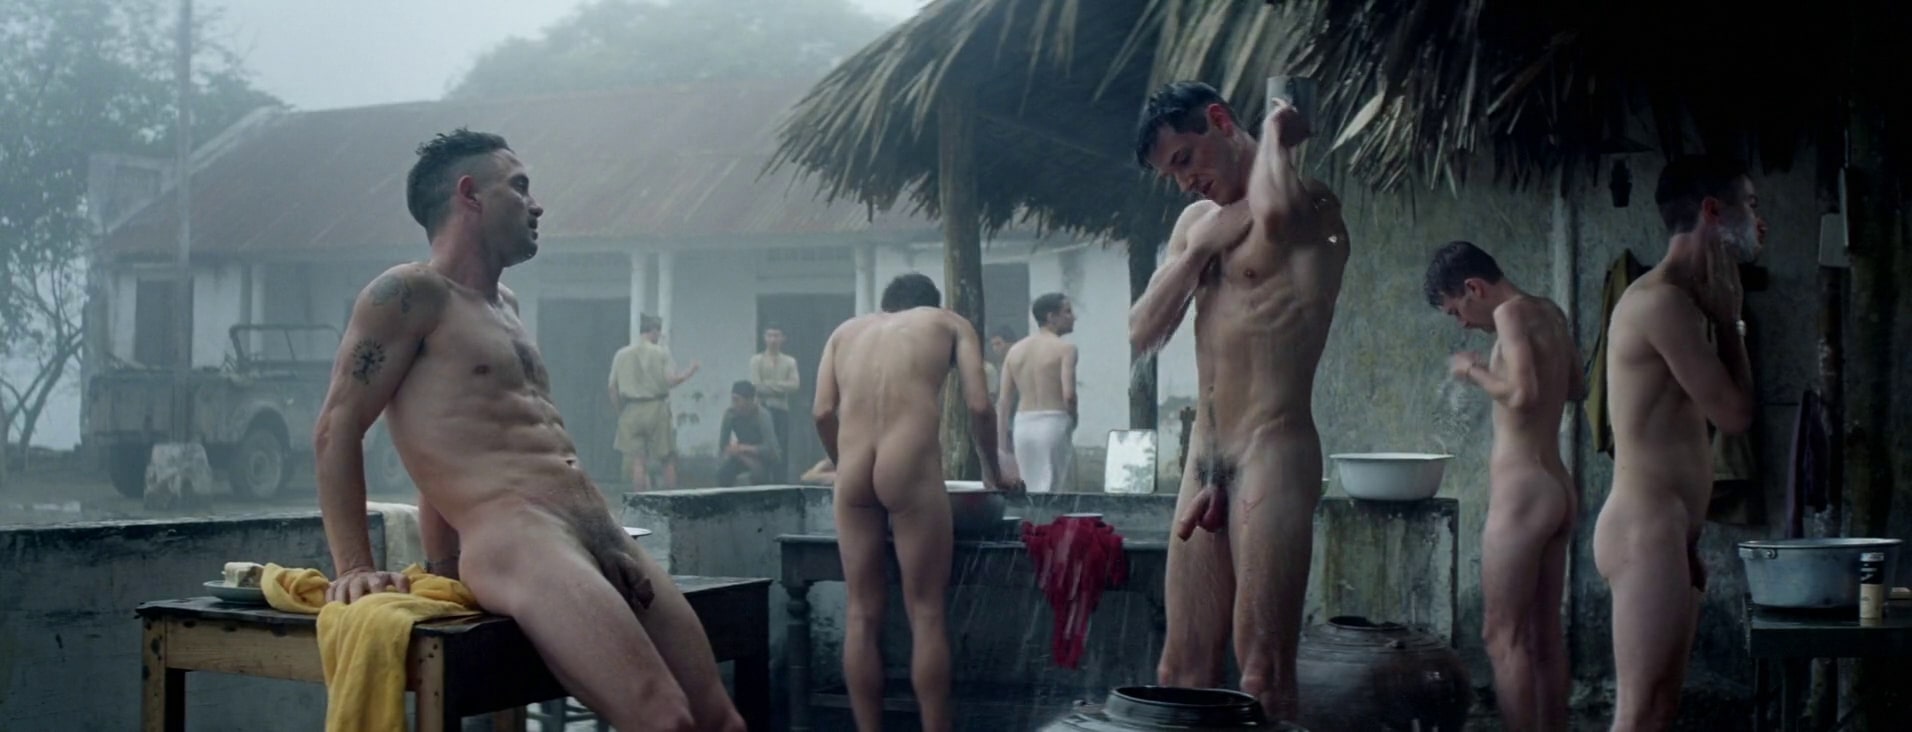 Incredibly Hot And Hung Guys Showering Nude In Movie